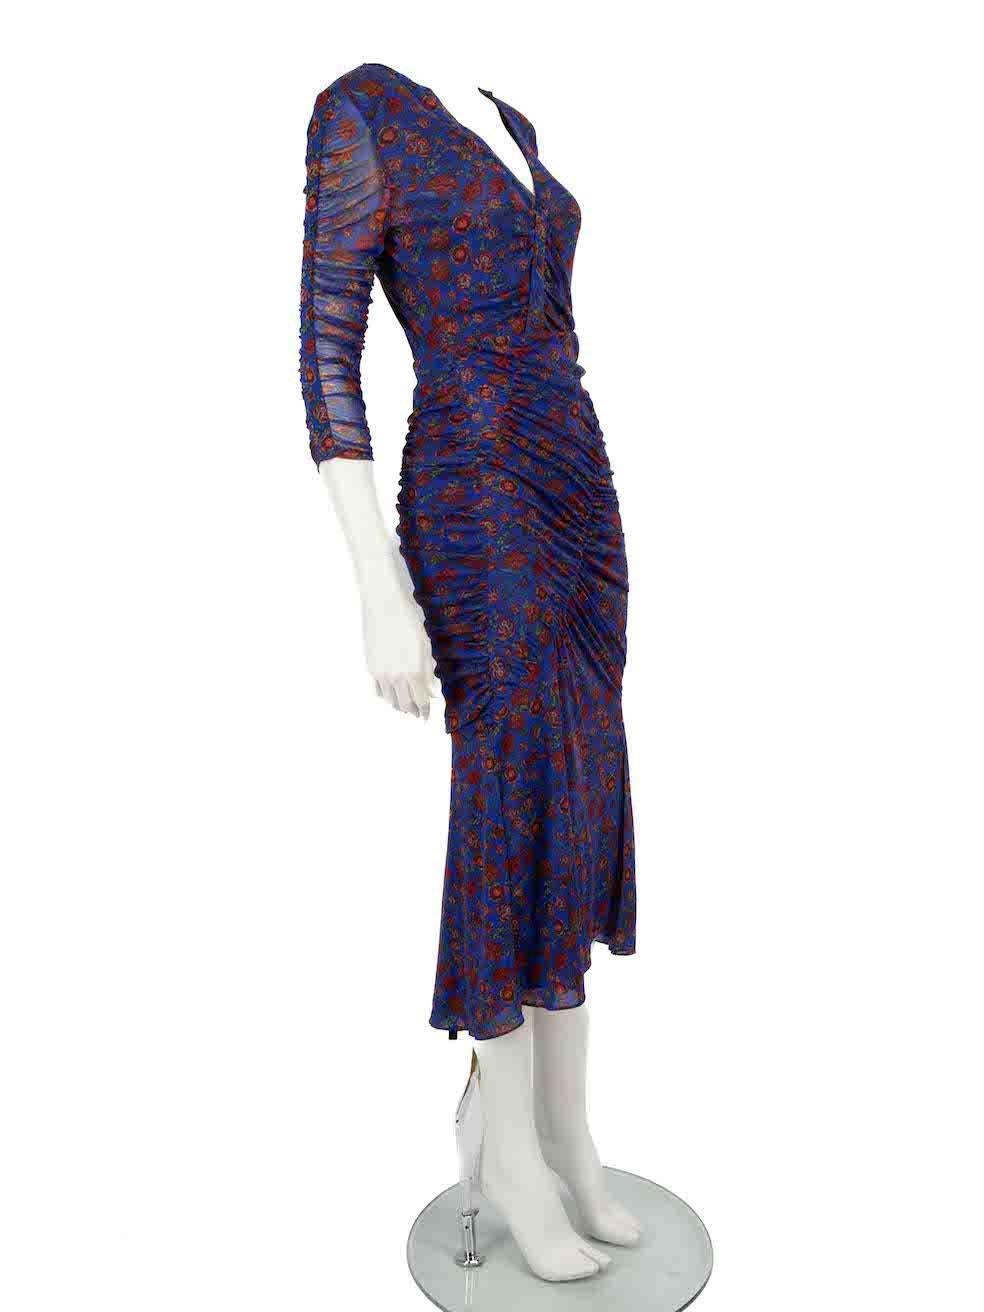 CONDITION is Good. Minor wear to dress is evident. Light wear to both underarms with discolouration to the mesh on this used Diane Von Furstenberg designer resale item.
 
 
 
 Details
 
 
 Blue
 
 Synthetic
 
 Dress
 
 Floral pattern
 
 Bodycon
 
